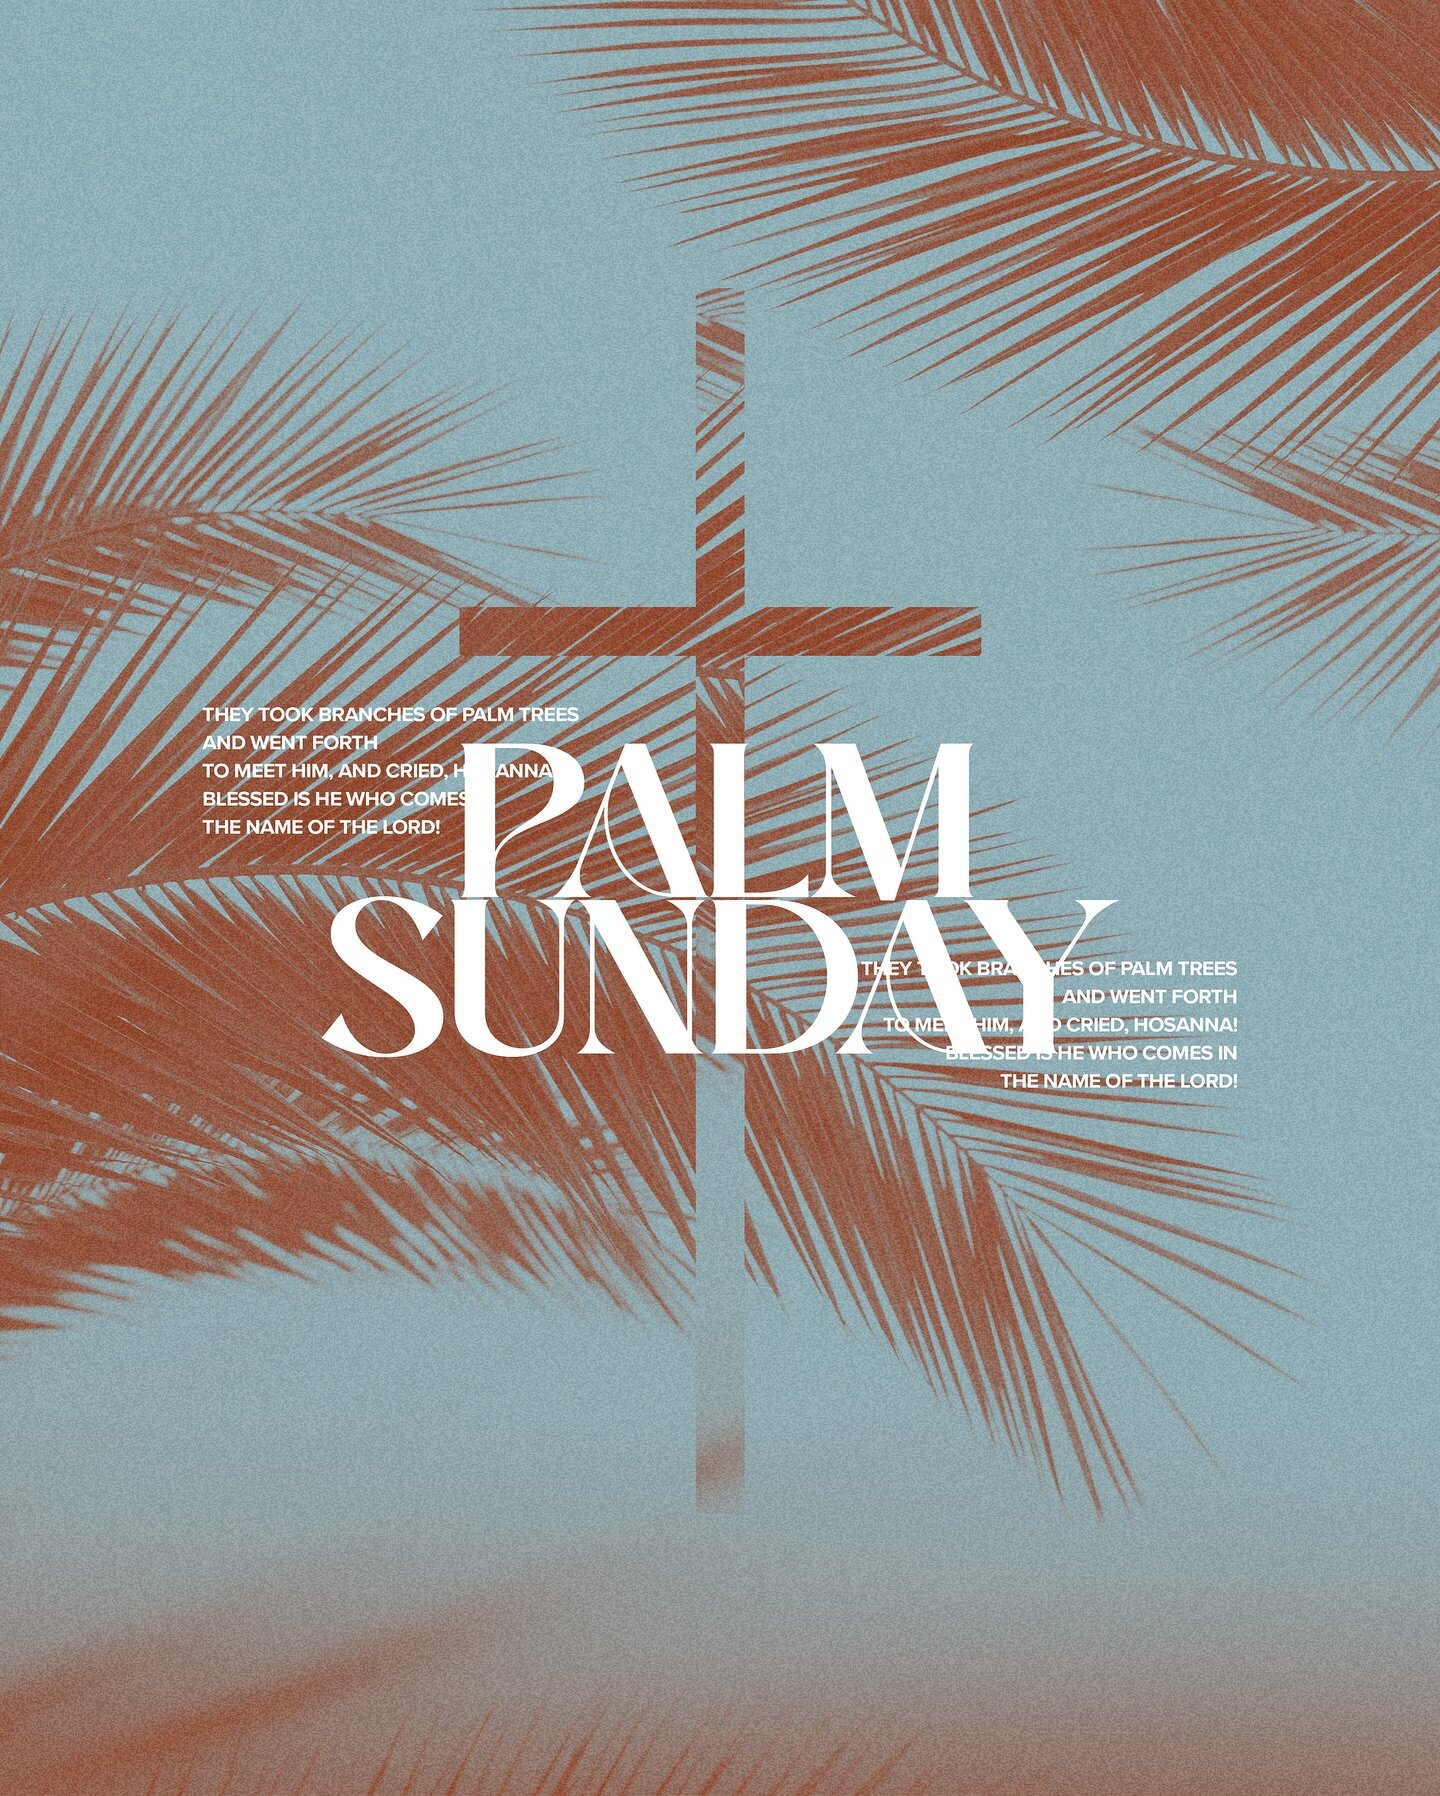 Happy Palm Sunday! Join us for church this morning at 9:15am, 11am, and 12:30pm.
&ldquo;So they took branches of palm trees and went out to meet him, crying out, &lsquo;Hosanna! Blessed is he who comes in the name of the Lord, even the King of Israel